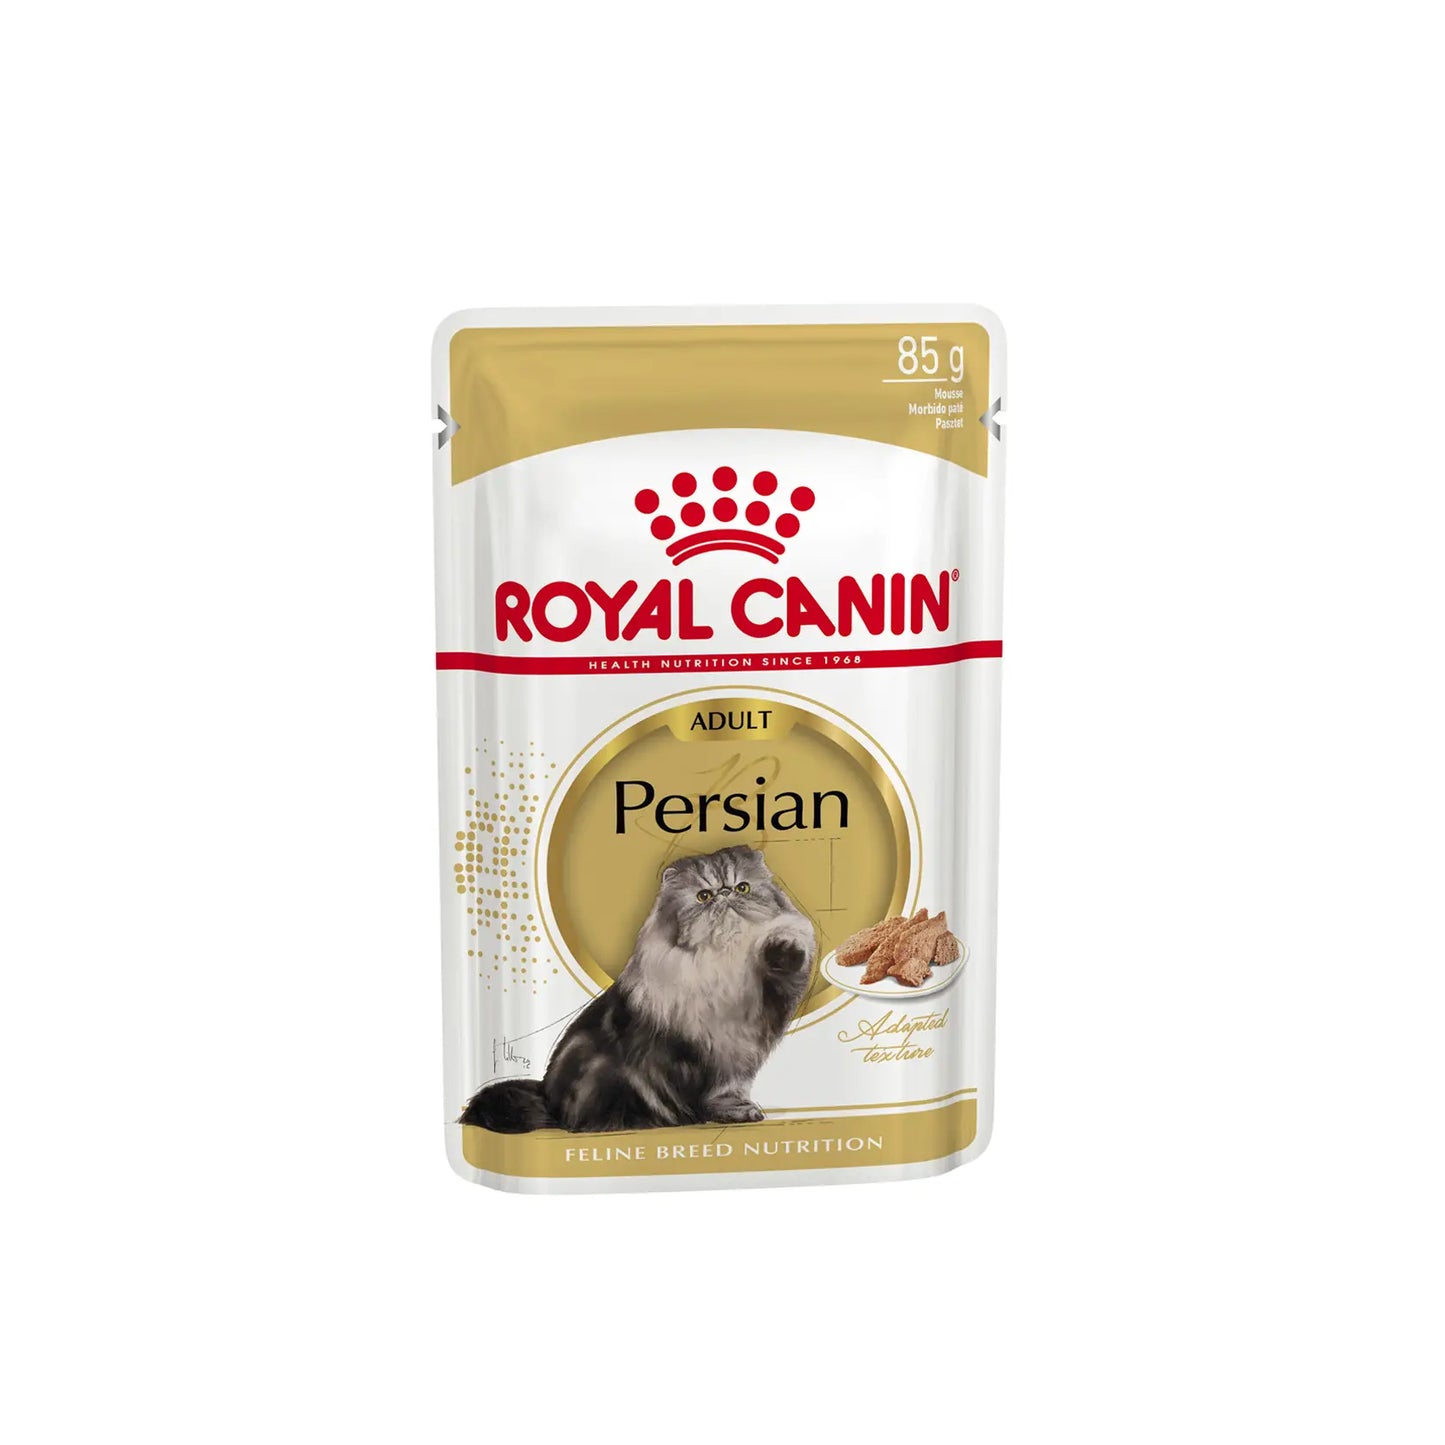 Royal Canin - Adult Persian Loaf Wet Food 85g